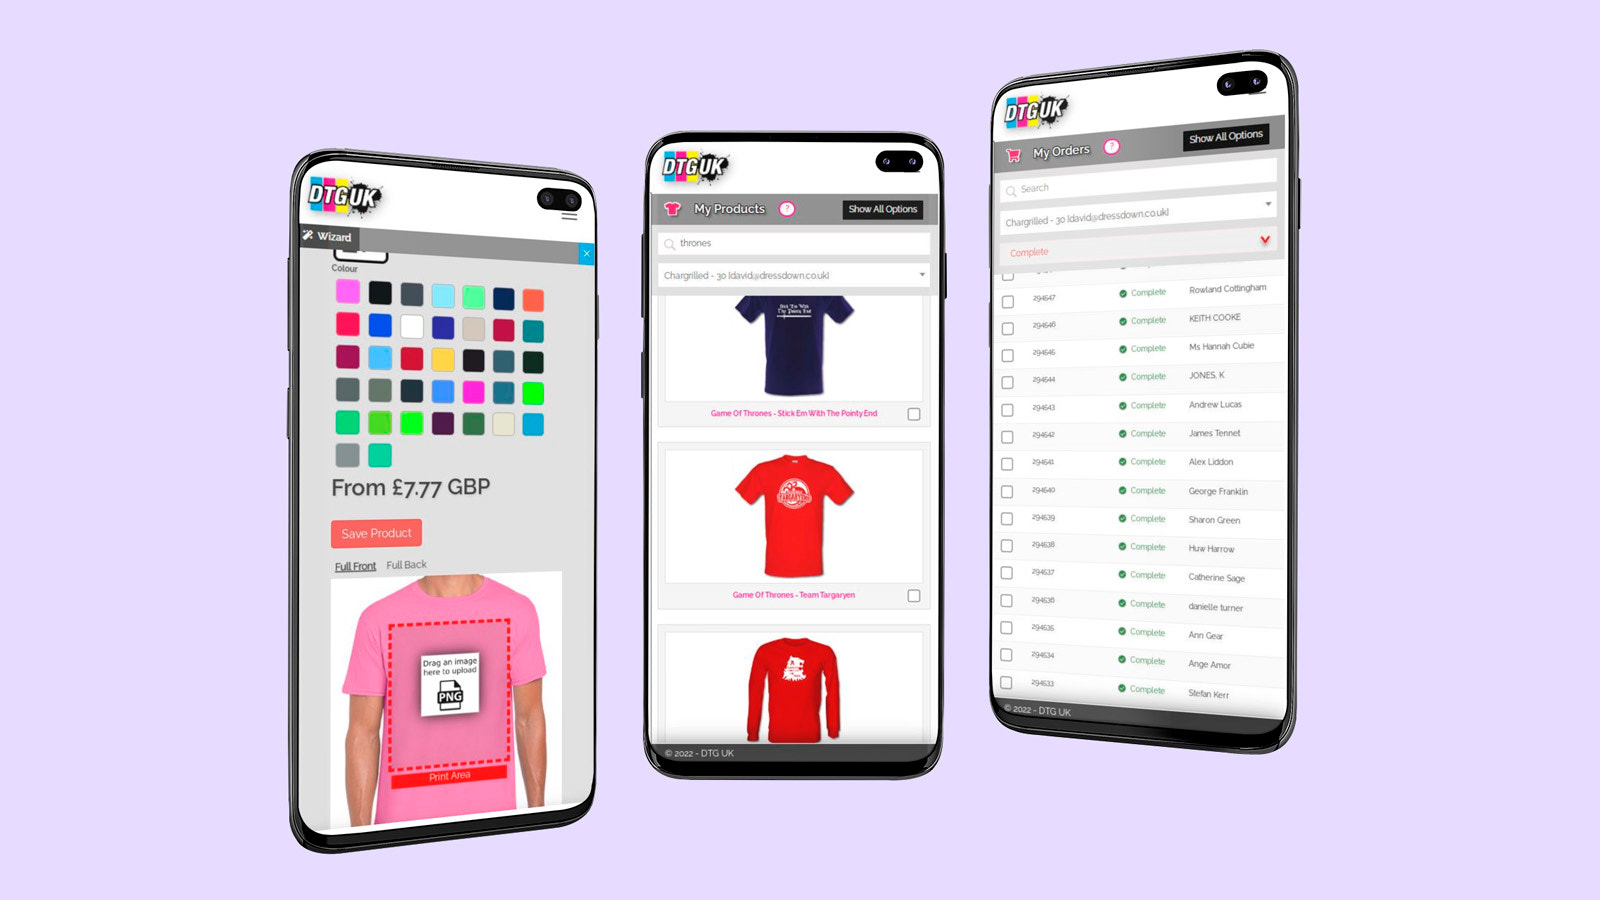 DTGUK- Add products, manage garments, select orders